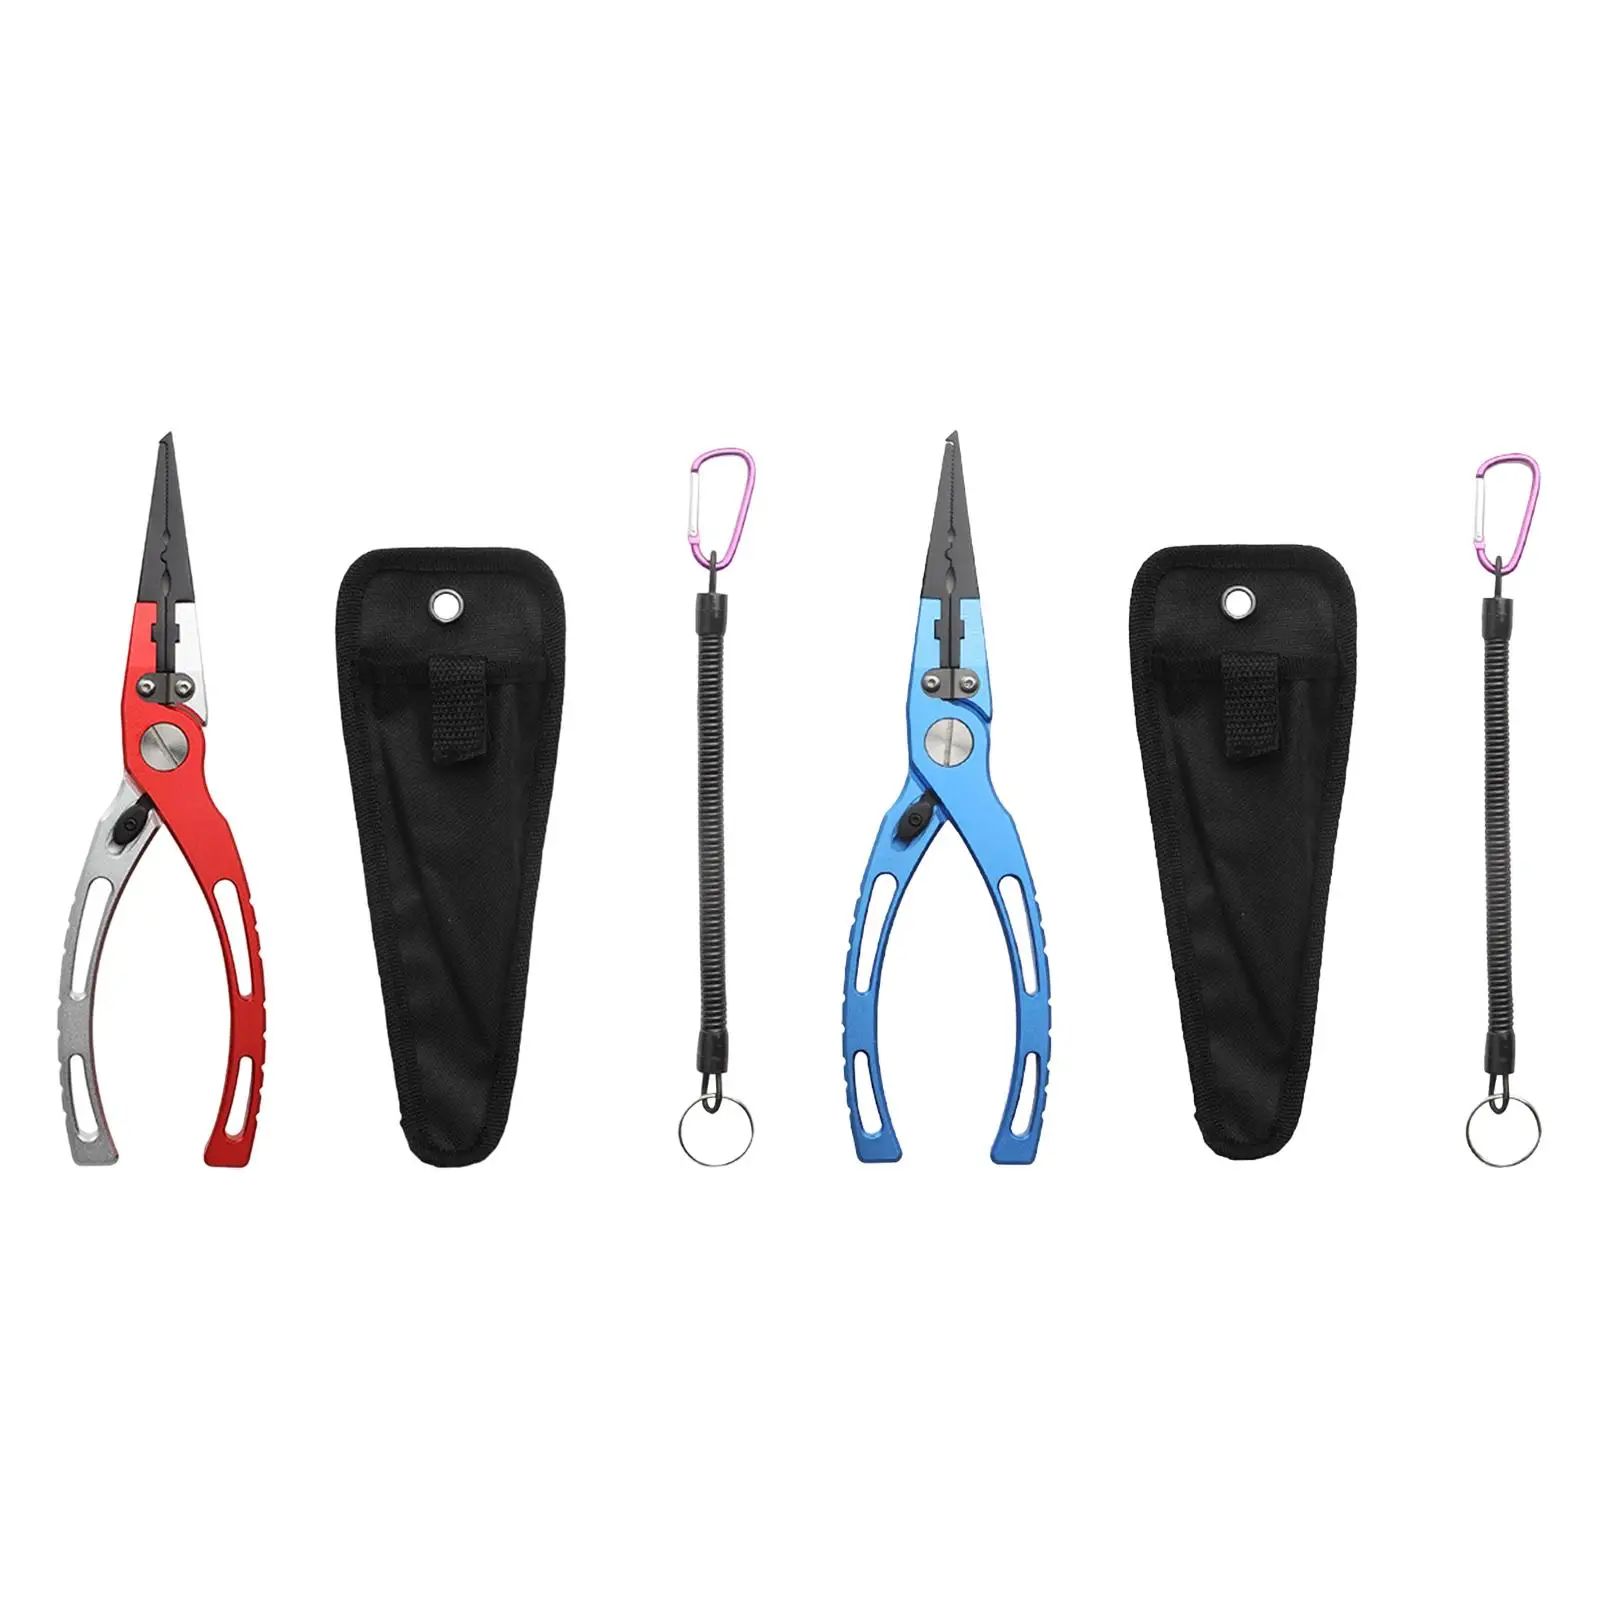 

Fishing Pliers Hook Remover Freshwater Fishing Gear with Storage Bag Lightweight Comfortable Gripping Line Fish Gripper